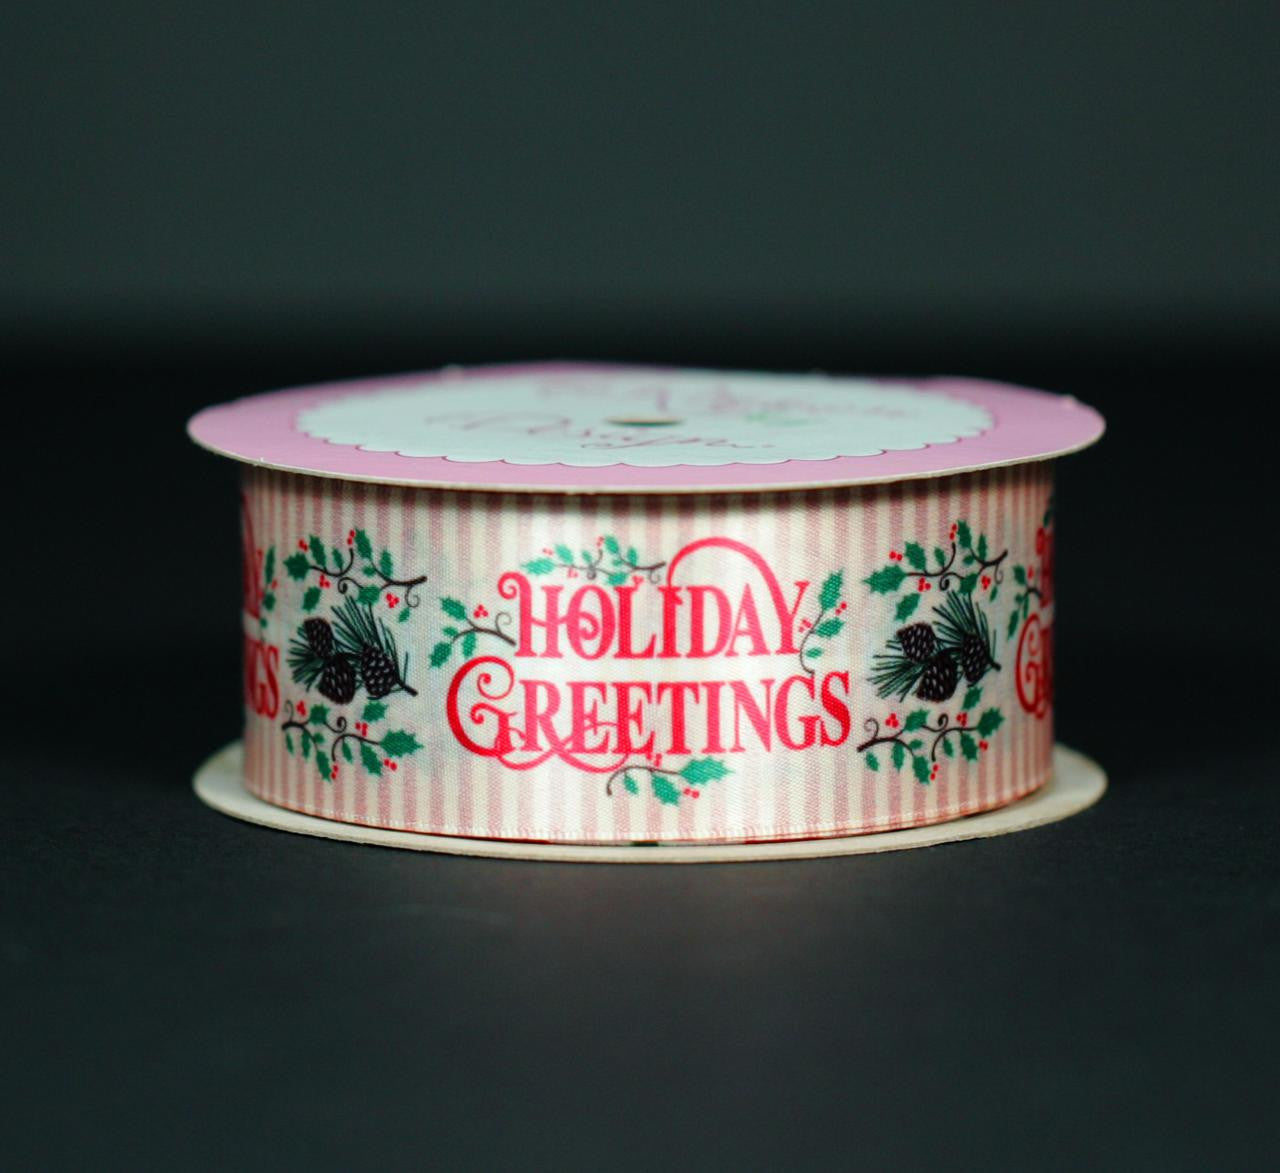 Holiday Greetings in Red on a golden striped background with pine cones, holly and white pine branch bring back a vintage holiday look. This is the ideal ribbon for a truly elegant package.